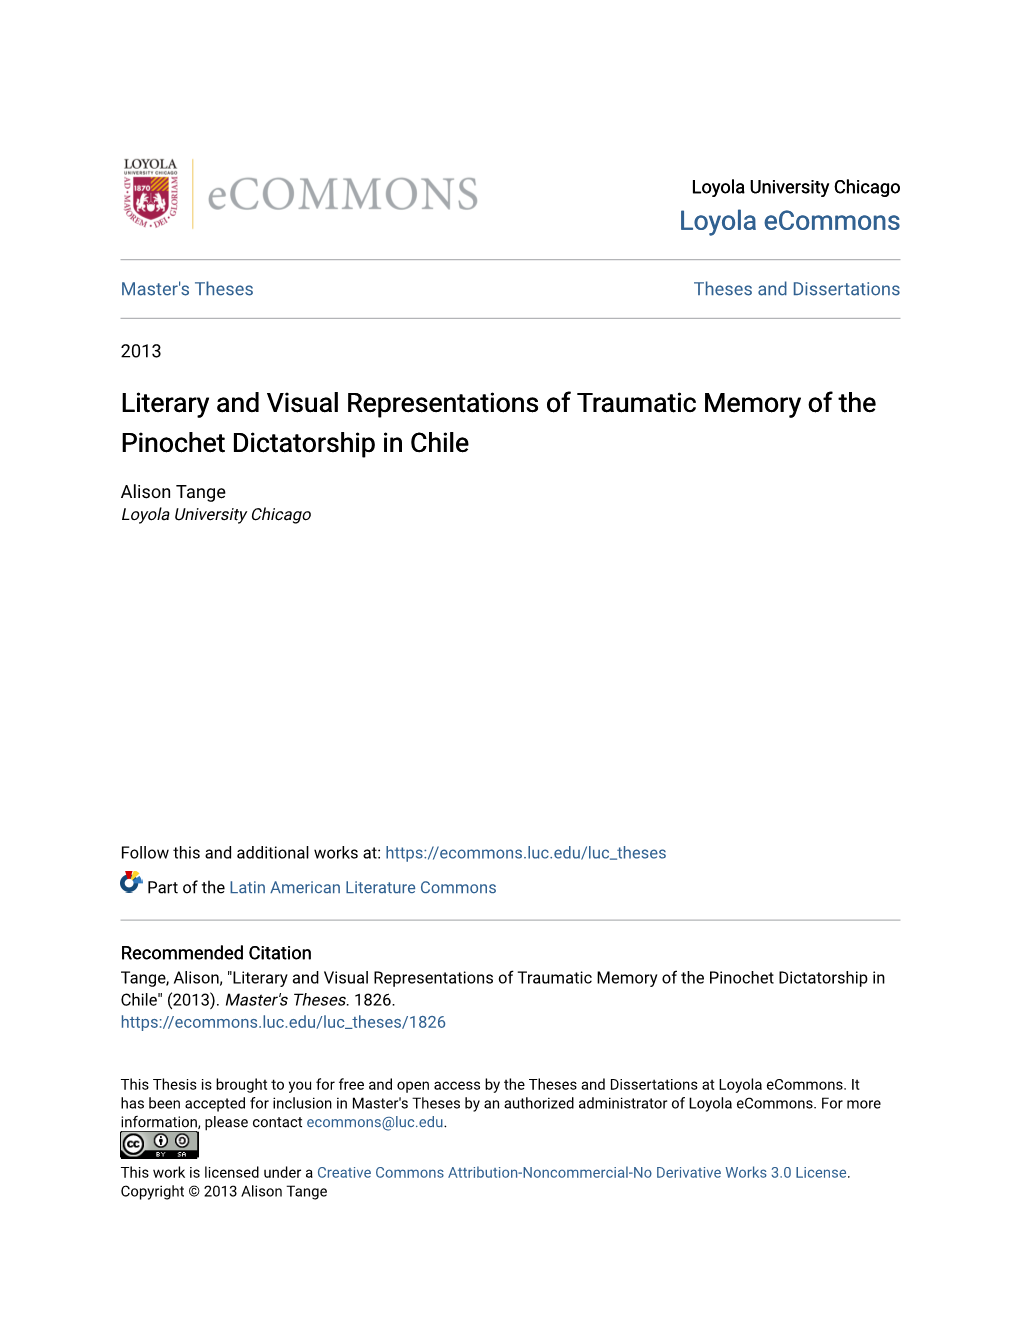 Literary and Visual Representations of Traumatic Memory of the Pinochet Dictatorship in Chile